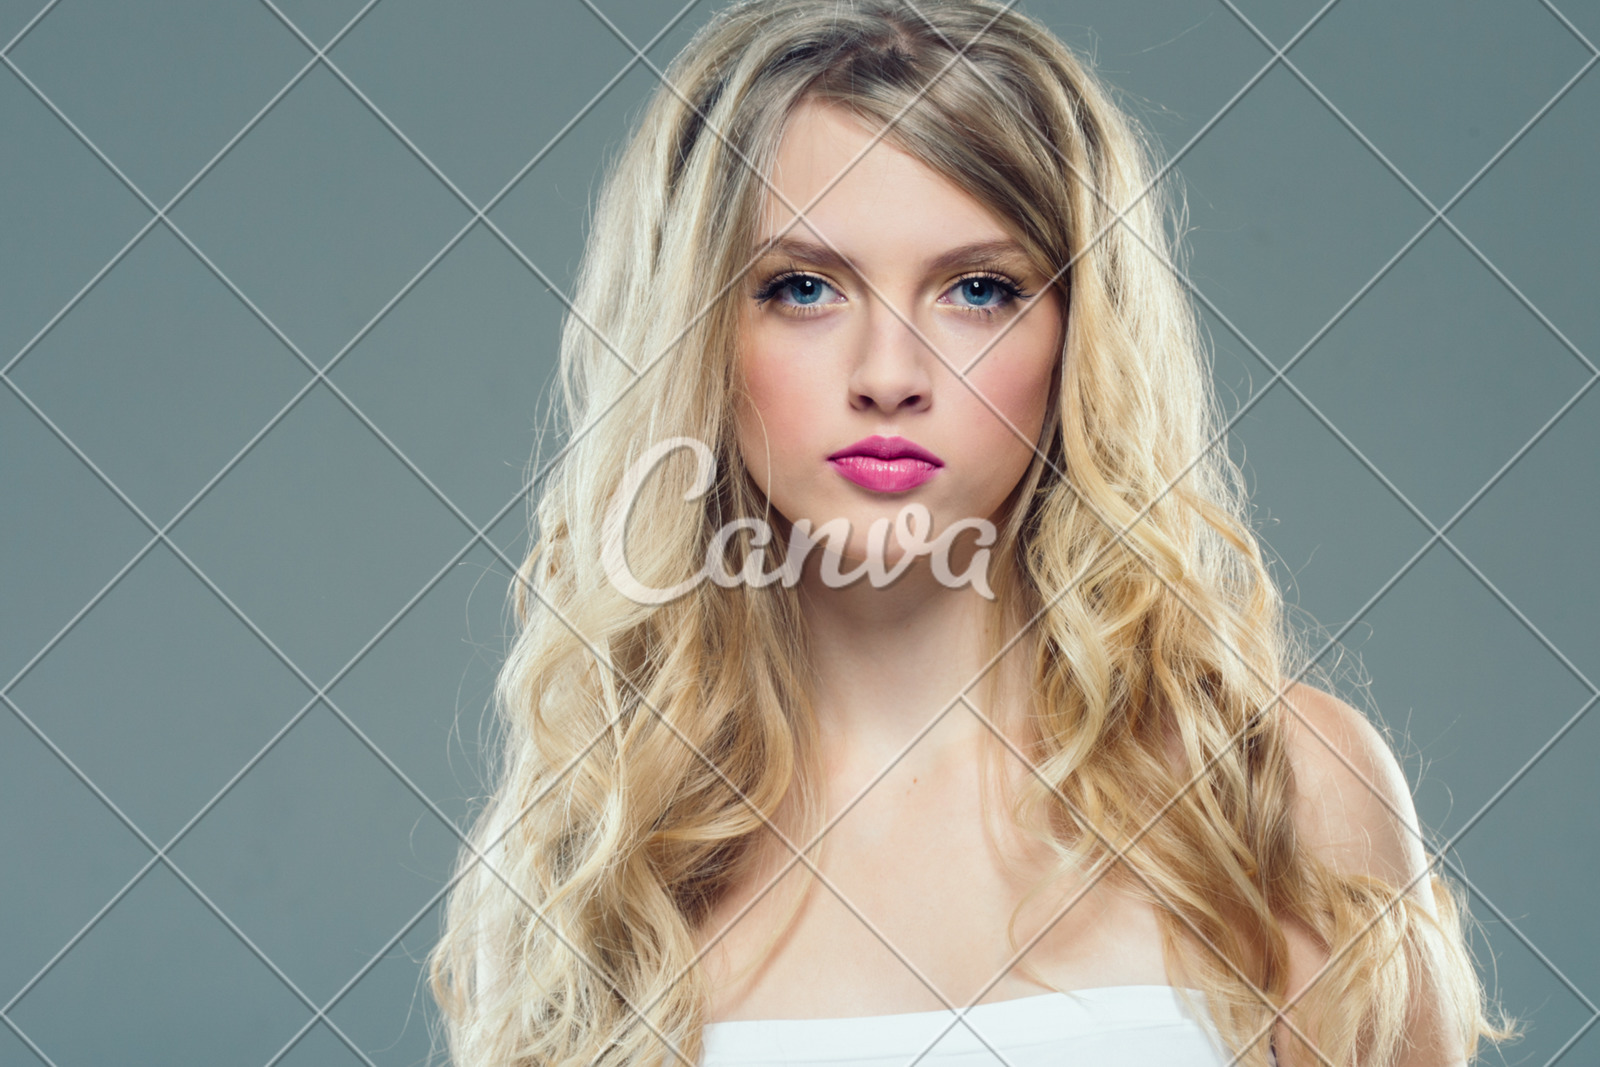 Curly Blonde Hair Woman Portrait With Healthy Skin Photos By Canva